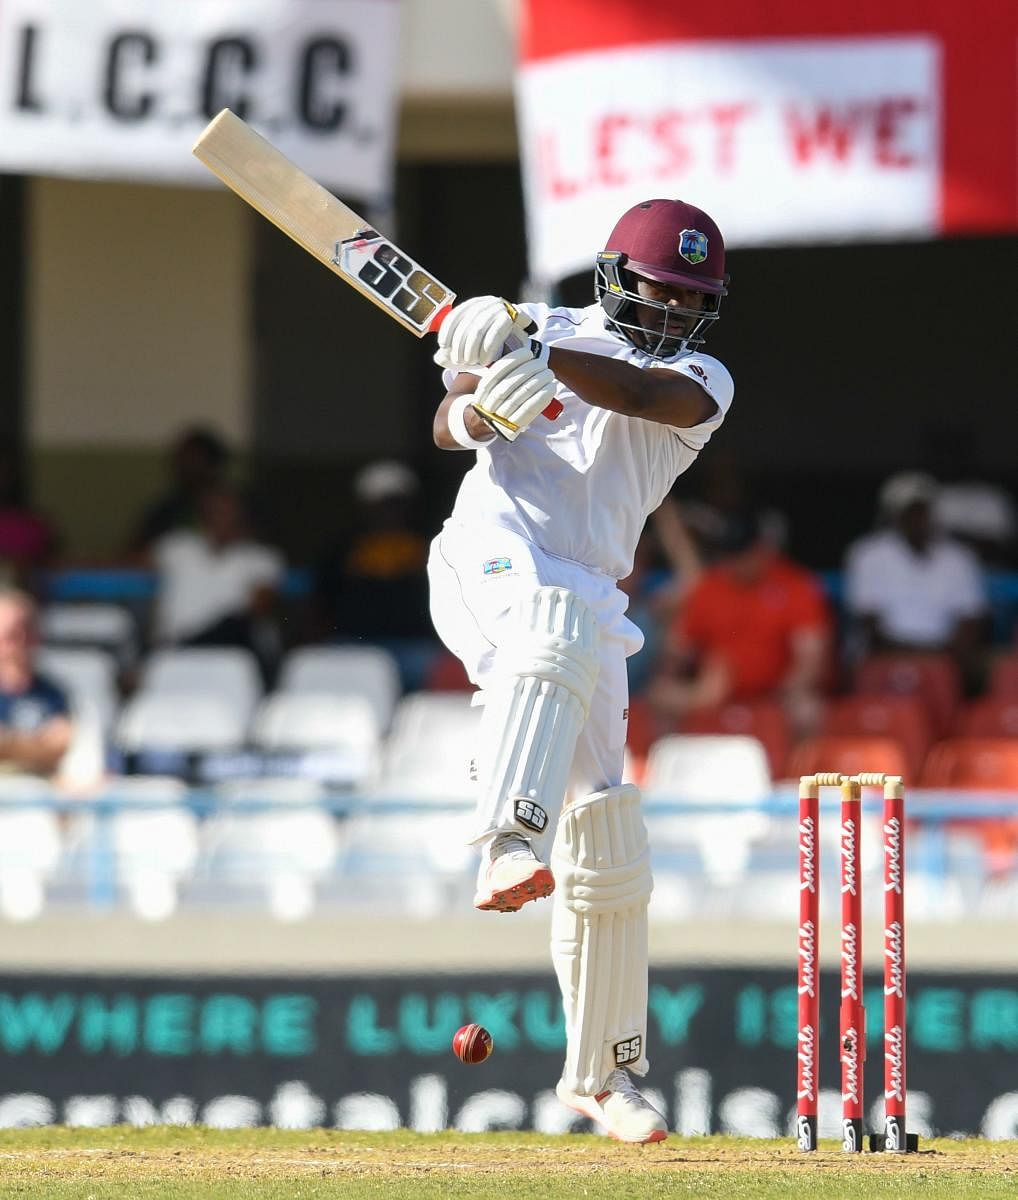 Dogged Windies remain in control